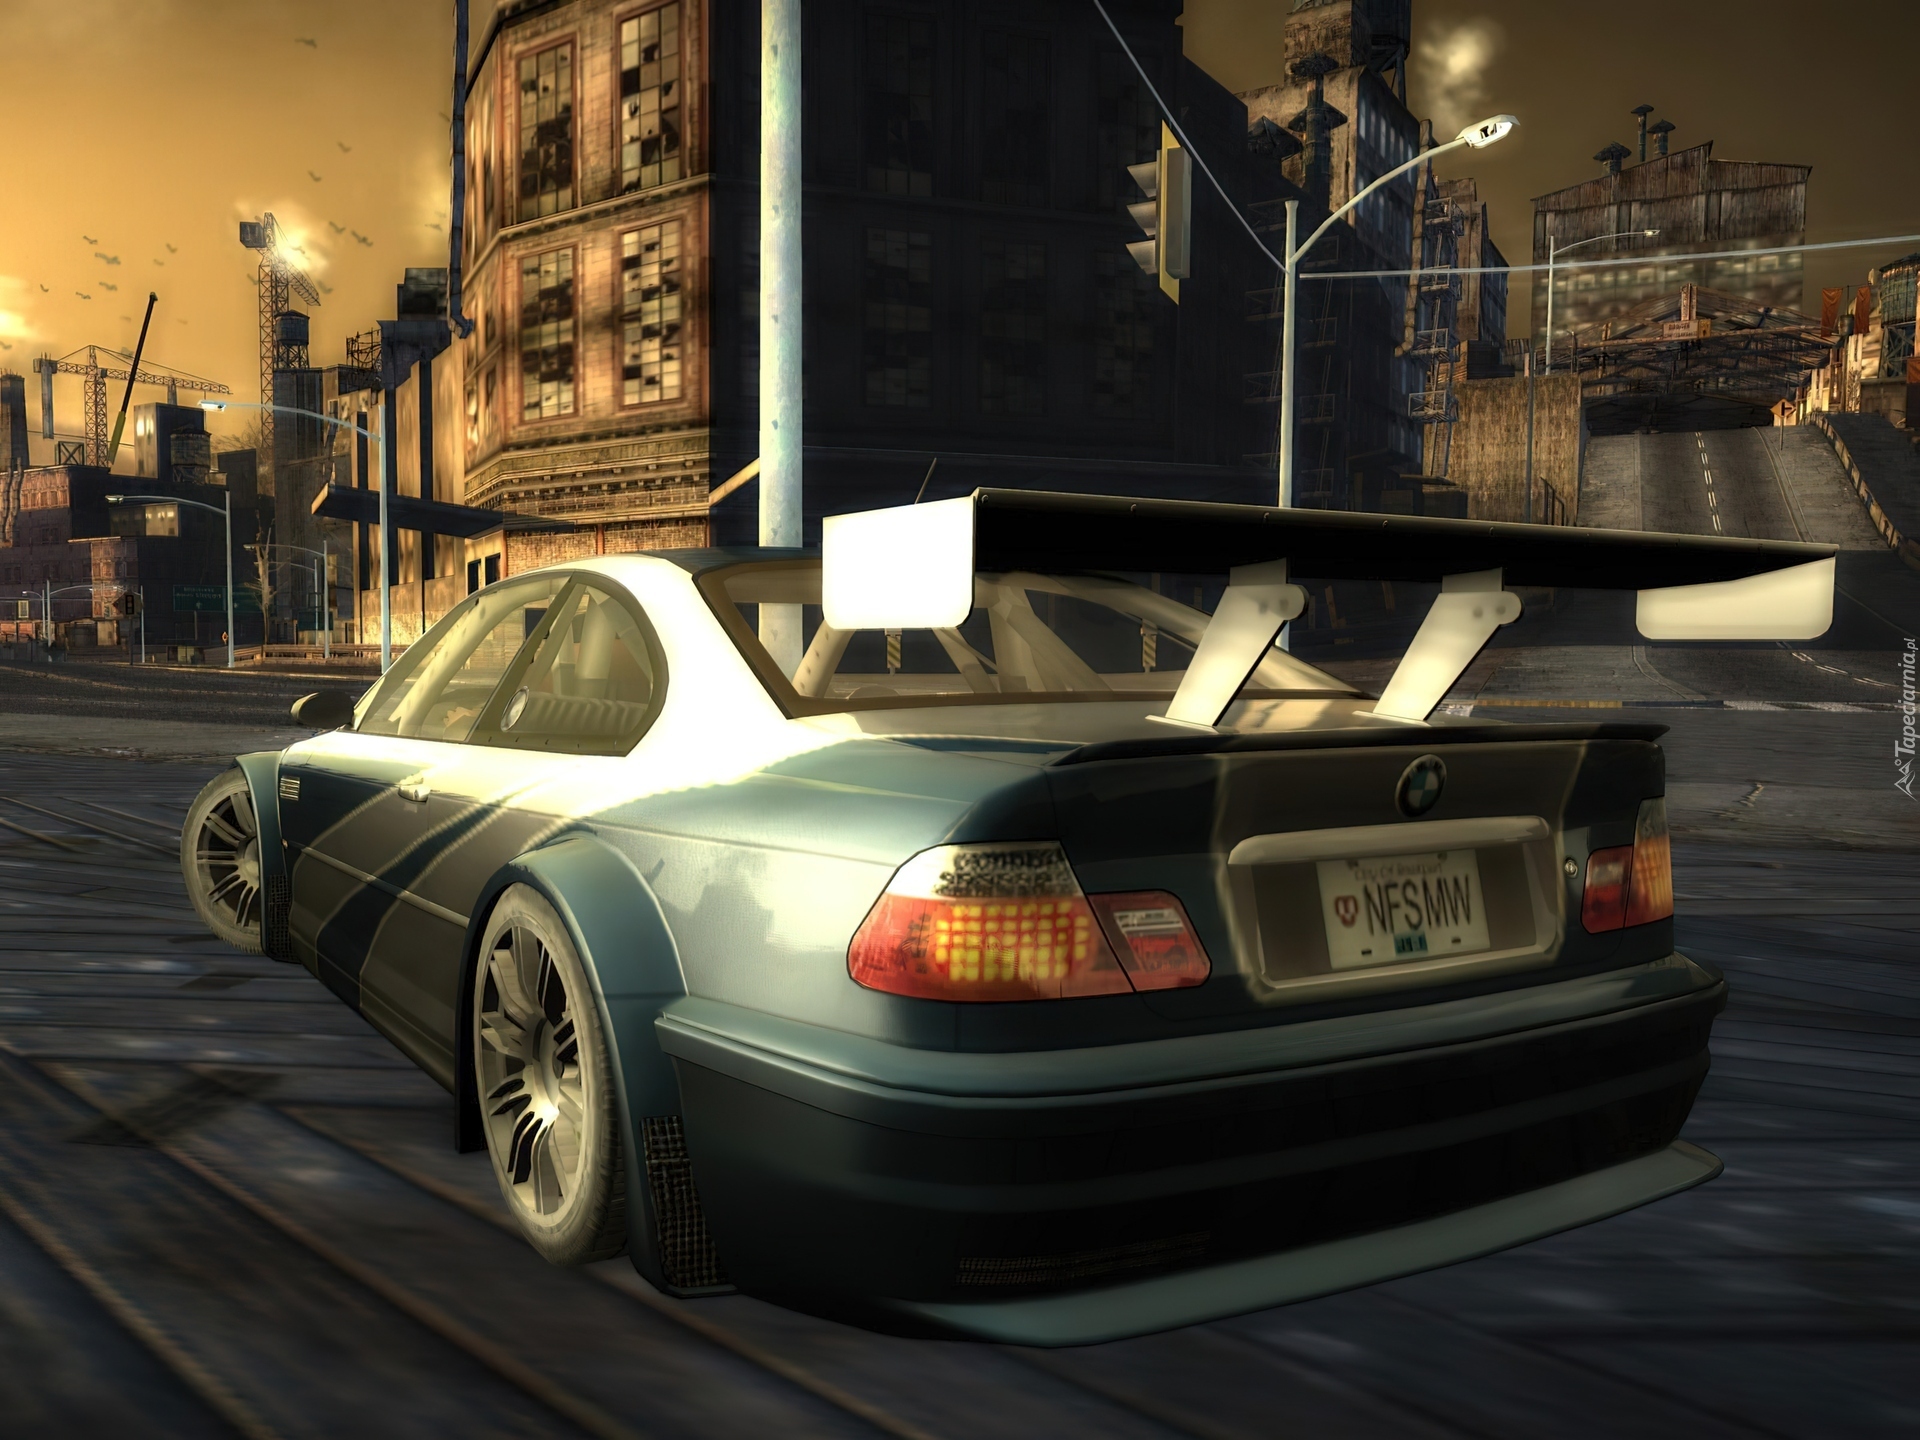 Nfs mw cars. Most wanted 2005 Black Edition машины. BMW m3 GTR NFS MW. Гонки NFS most wanted. Need for Speed most wanted 2005.